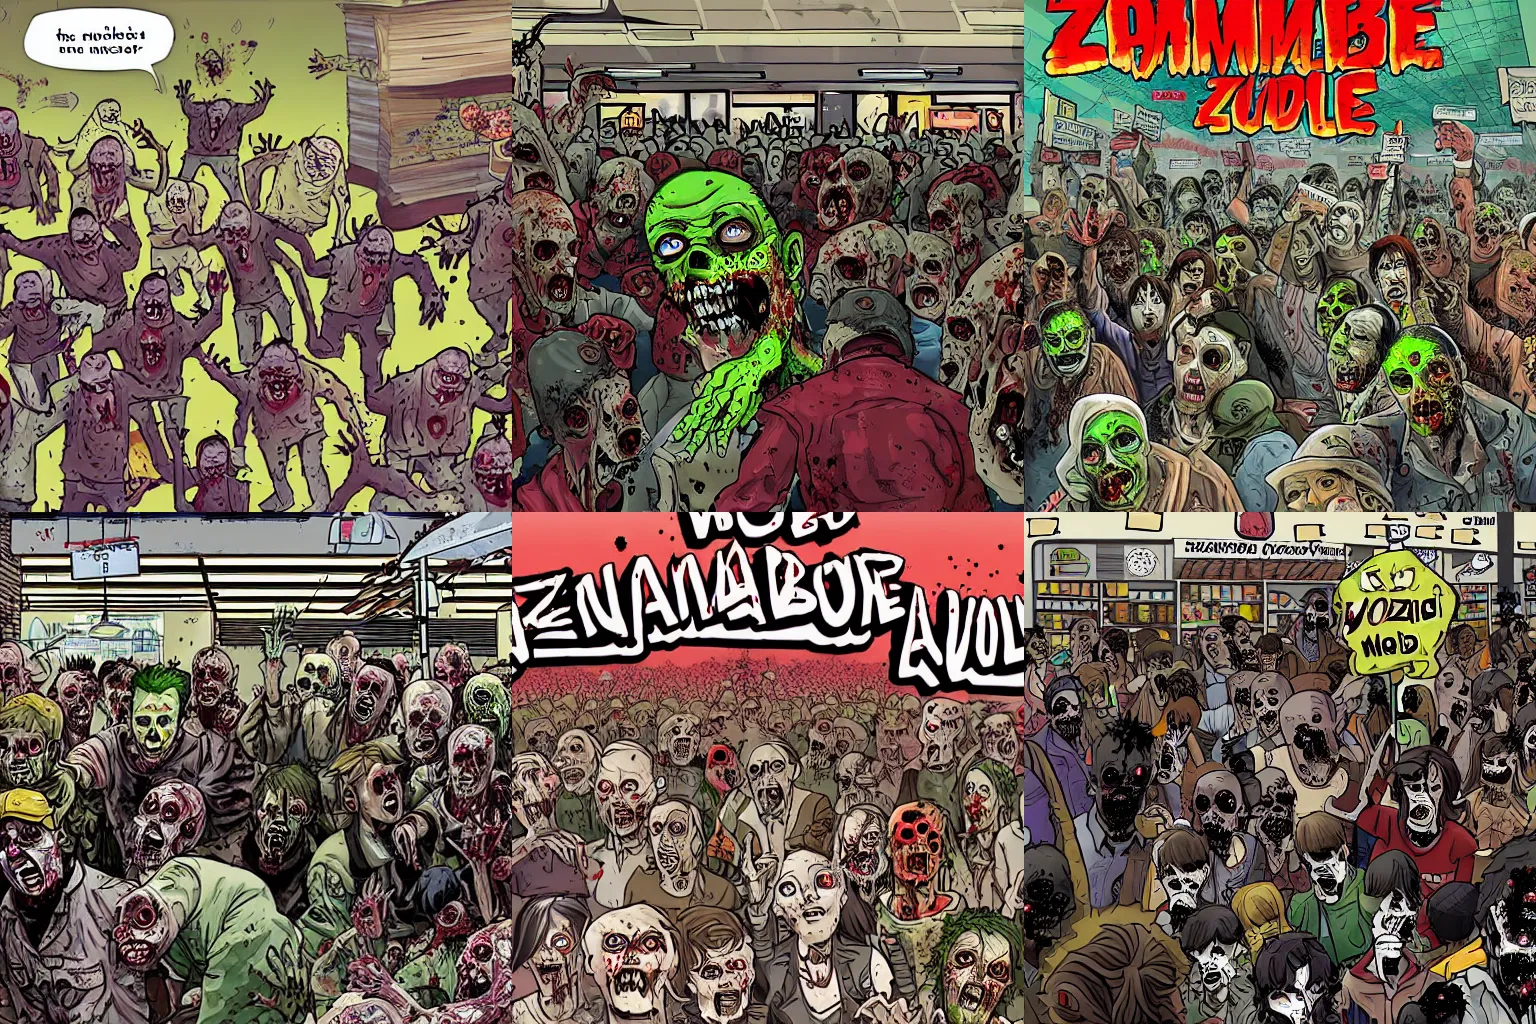 Prompt: zombie apocalypse, in supermarket, people being swarmed by horde of zombies, epic illustration